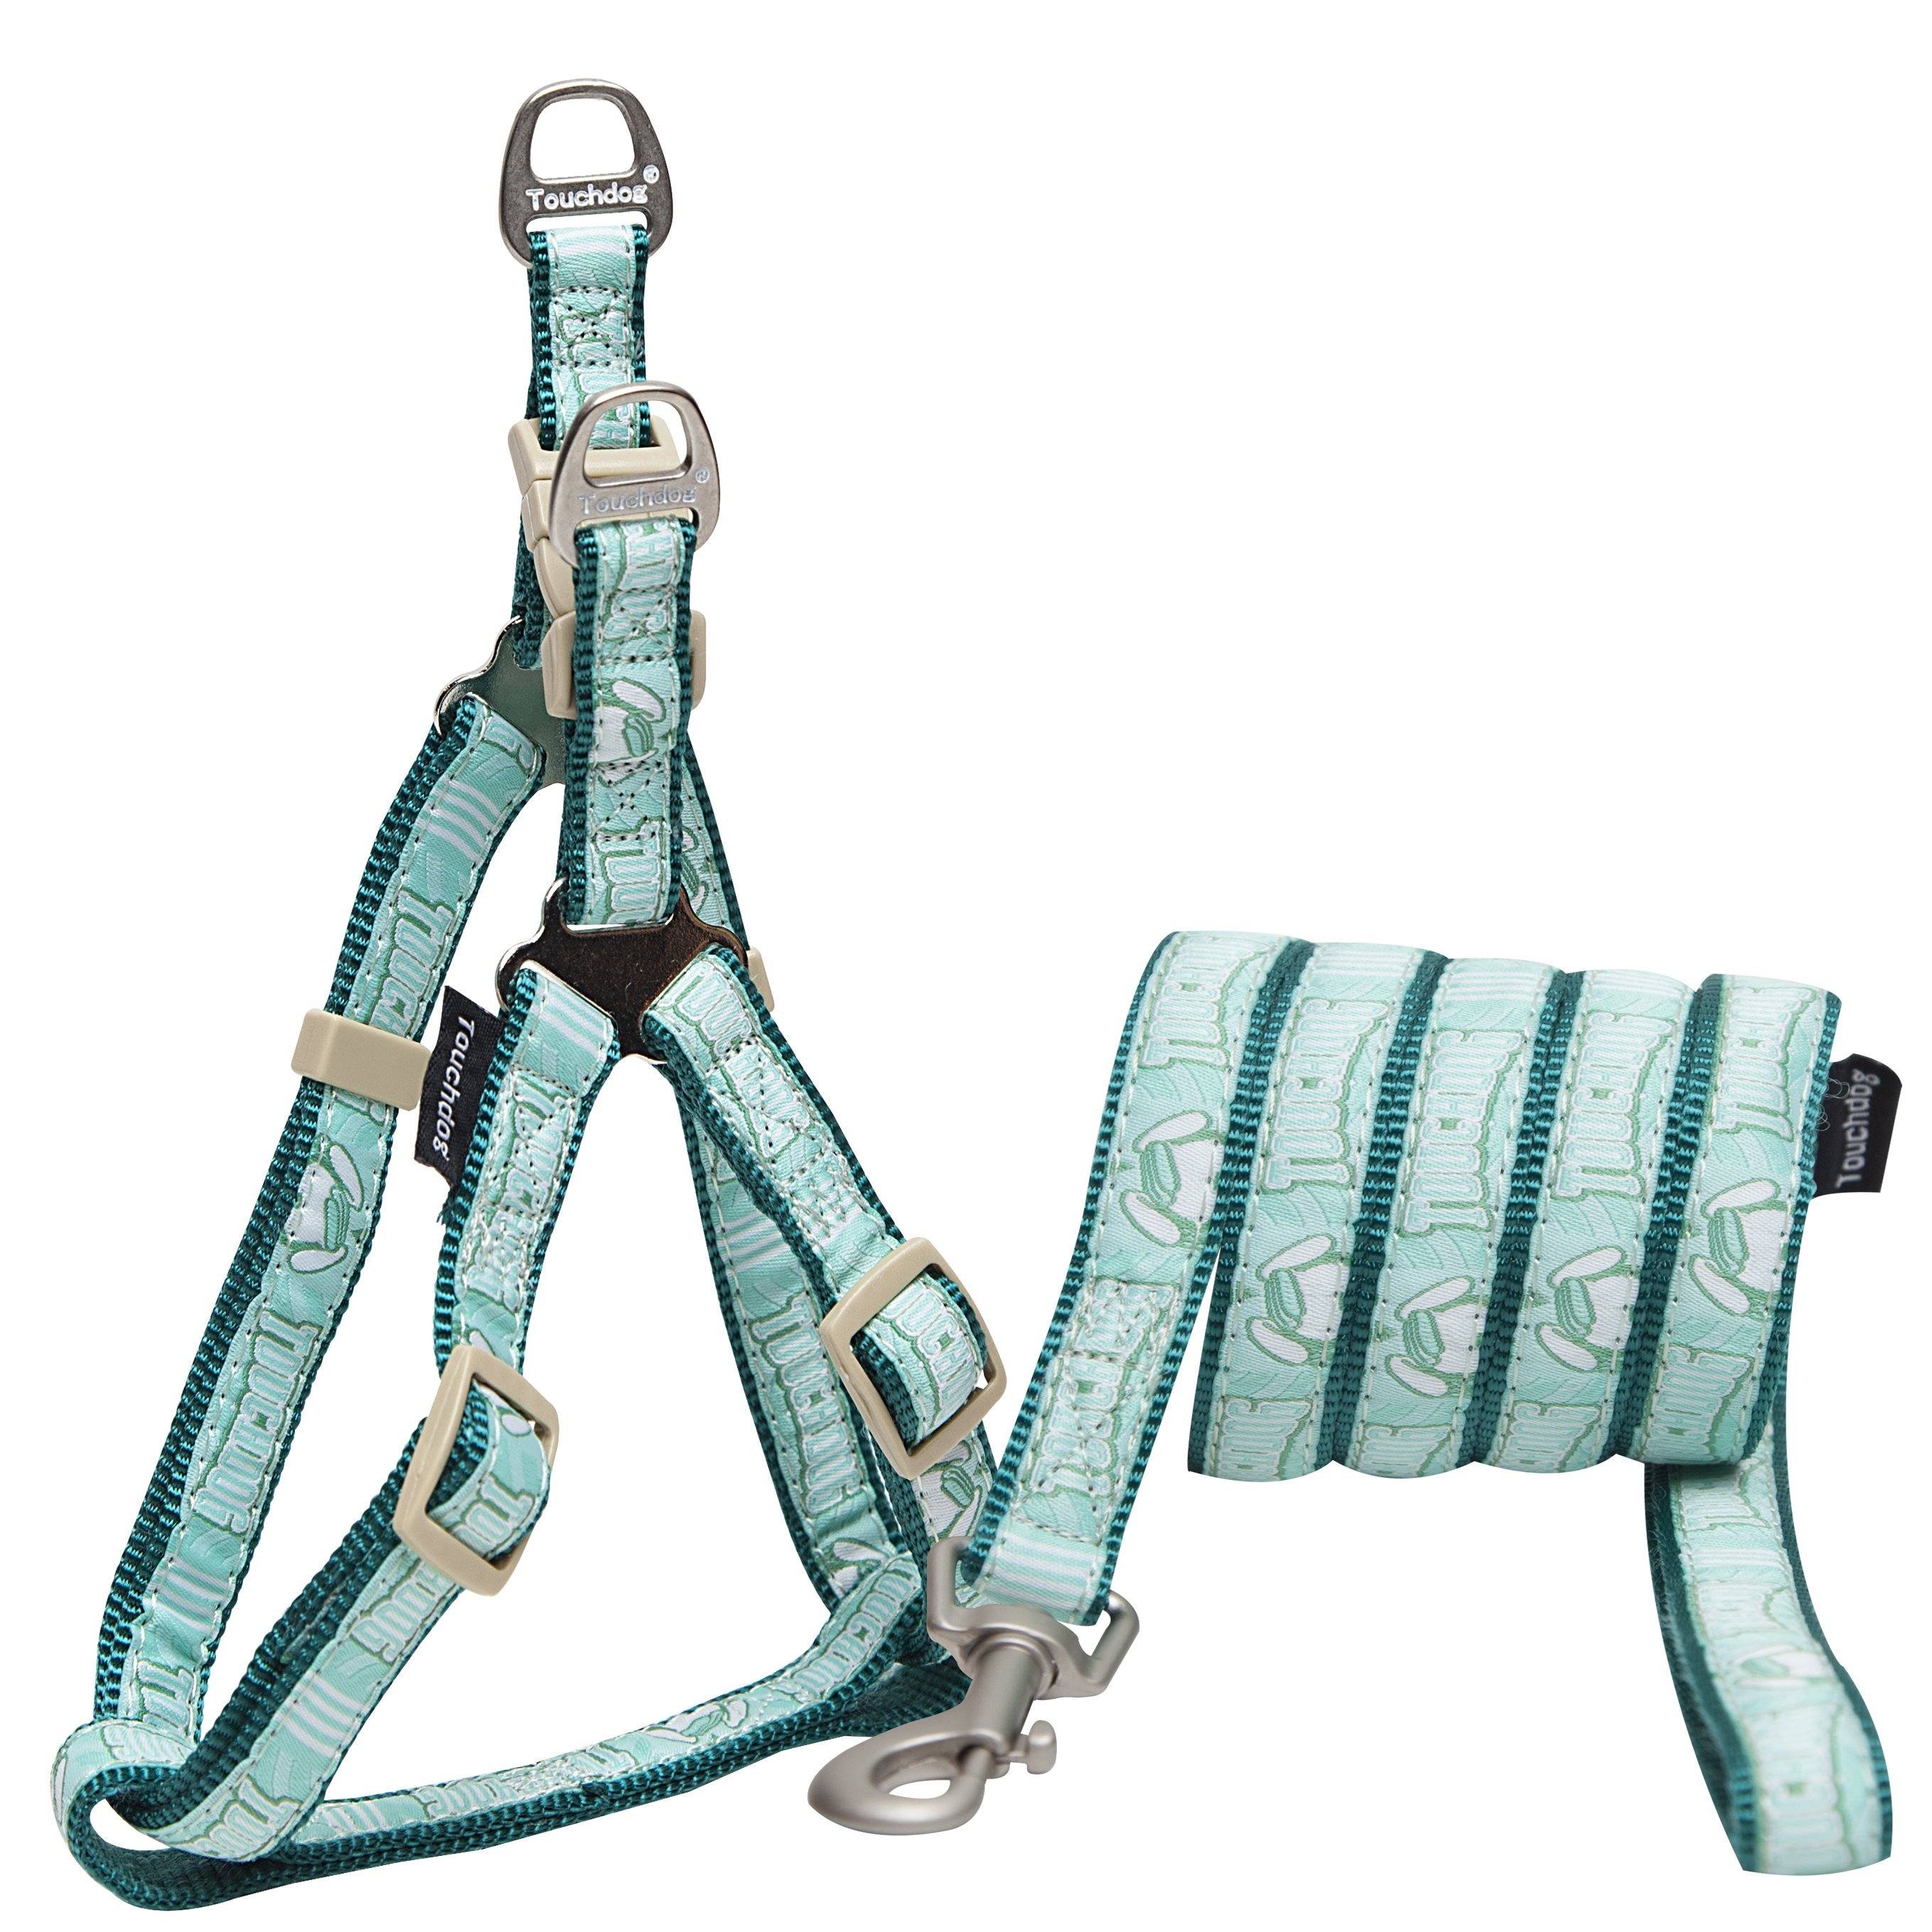 Touchdog 'Funny Bone' Tough Stitched Dog Harness and Leash Small Green